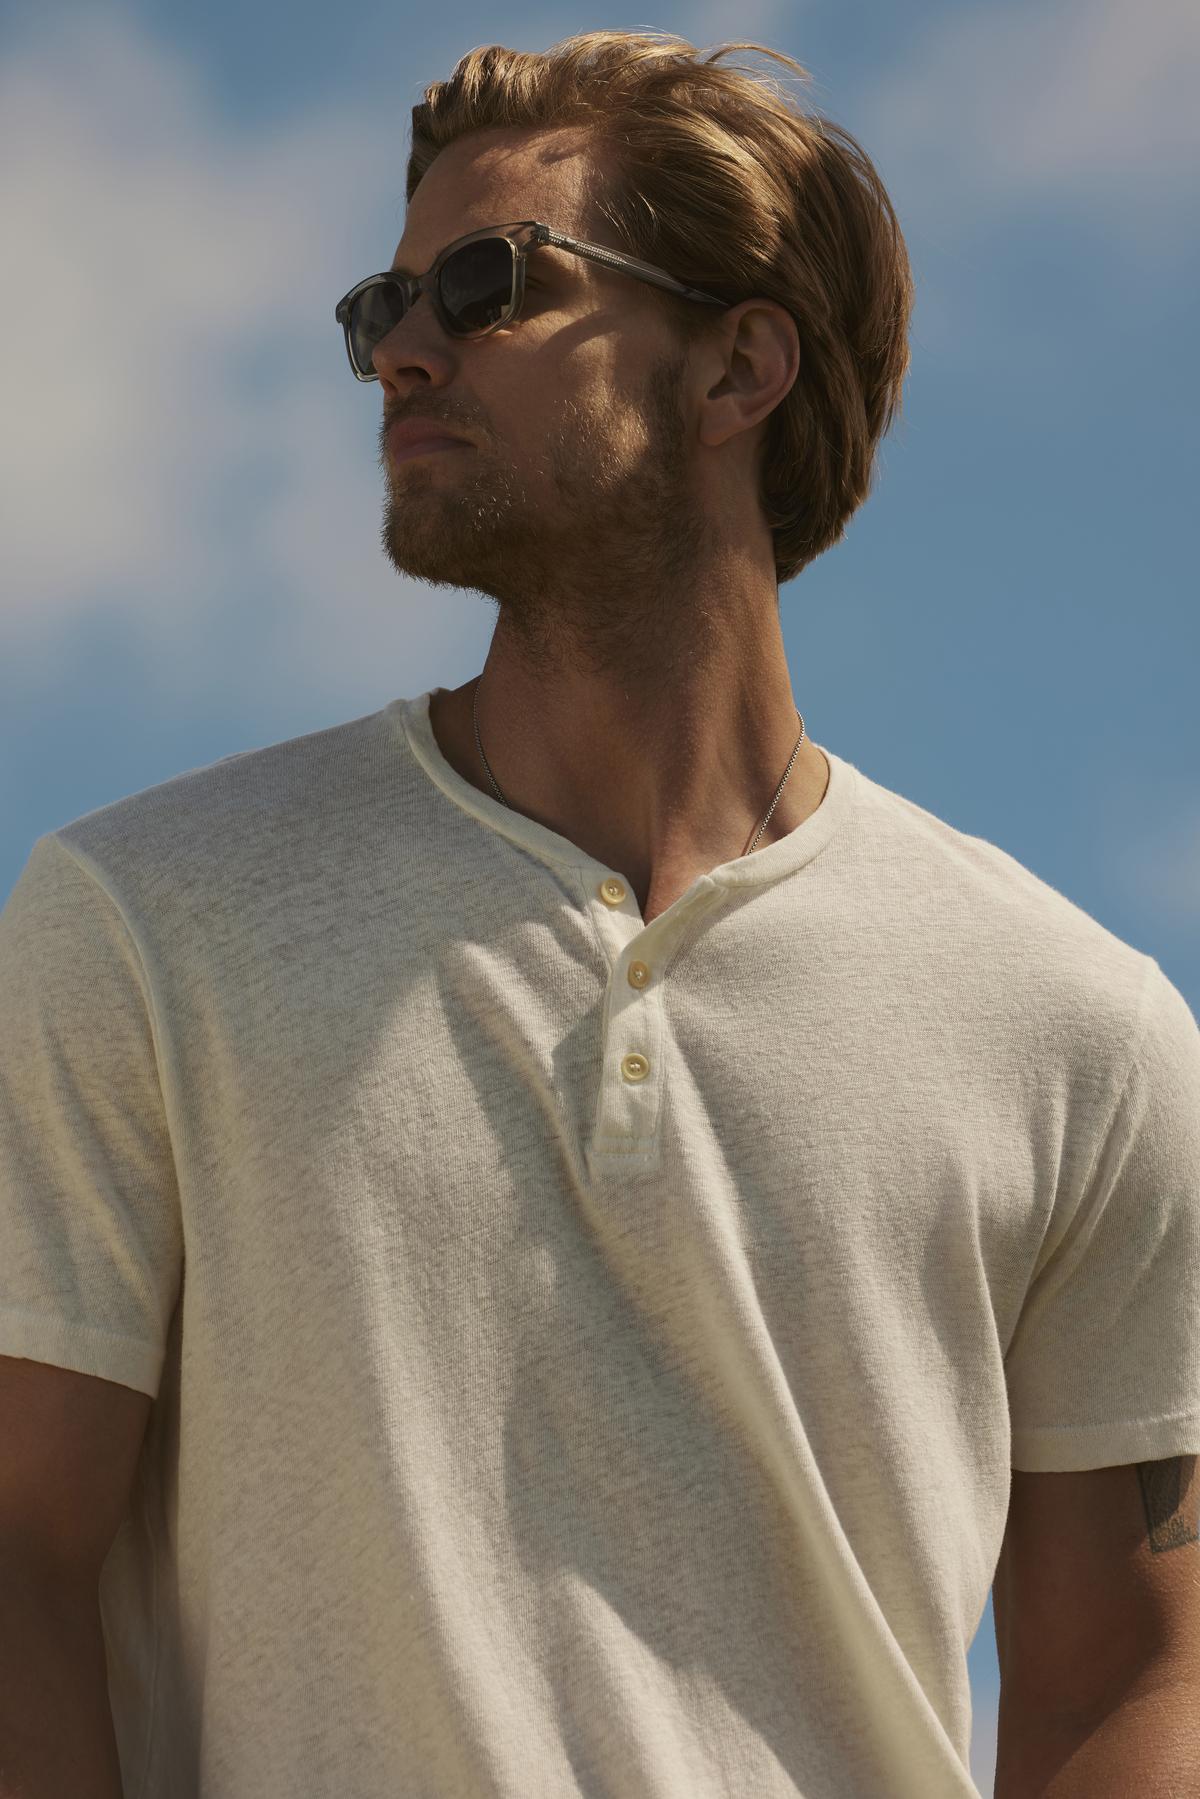 Man with blonde hair wearing sunglasses and a Velvet by Graham & Spencer's LIONEL HENLEY polo shirt looks up against a clear sky backdrop.-36753588650177